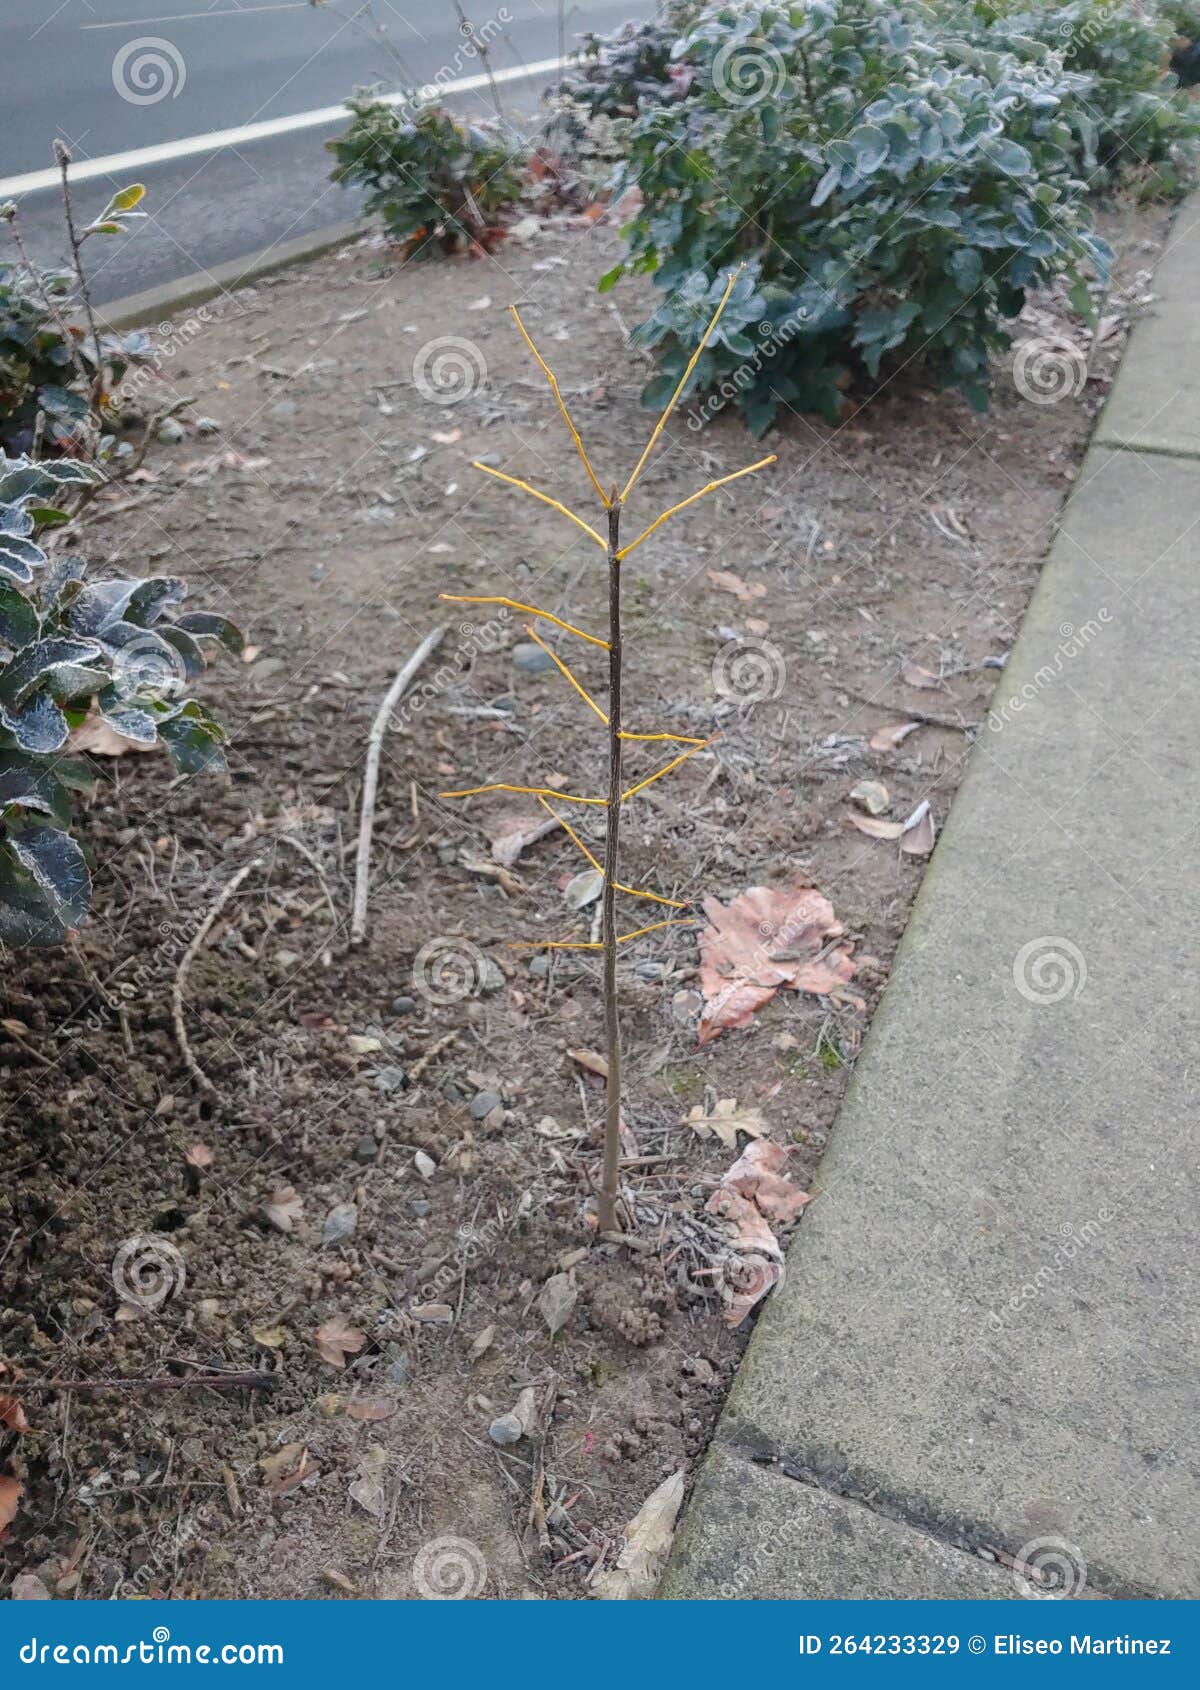 baby tree sprout by sidwalk with yellow branches